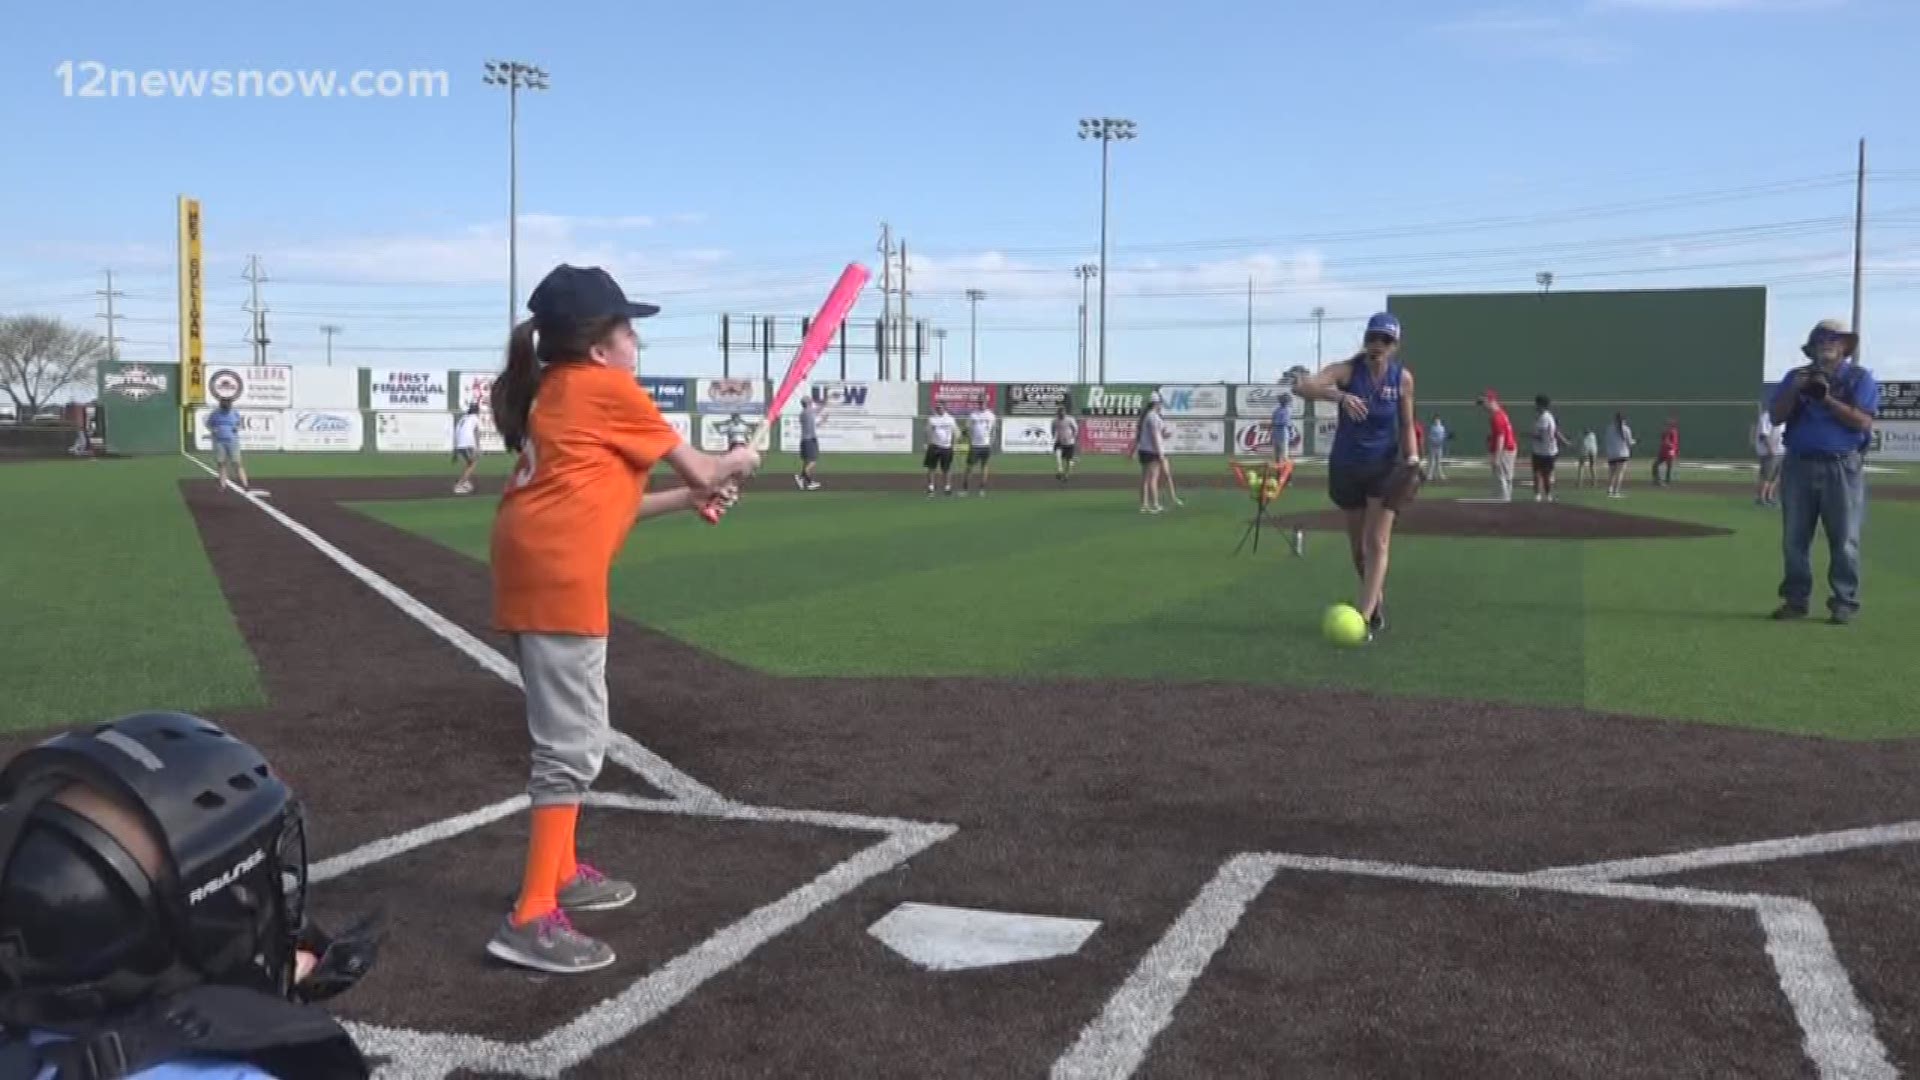 Boys and girls of all ages kicked off their baseball season on the turf Saturday.